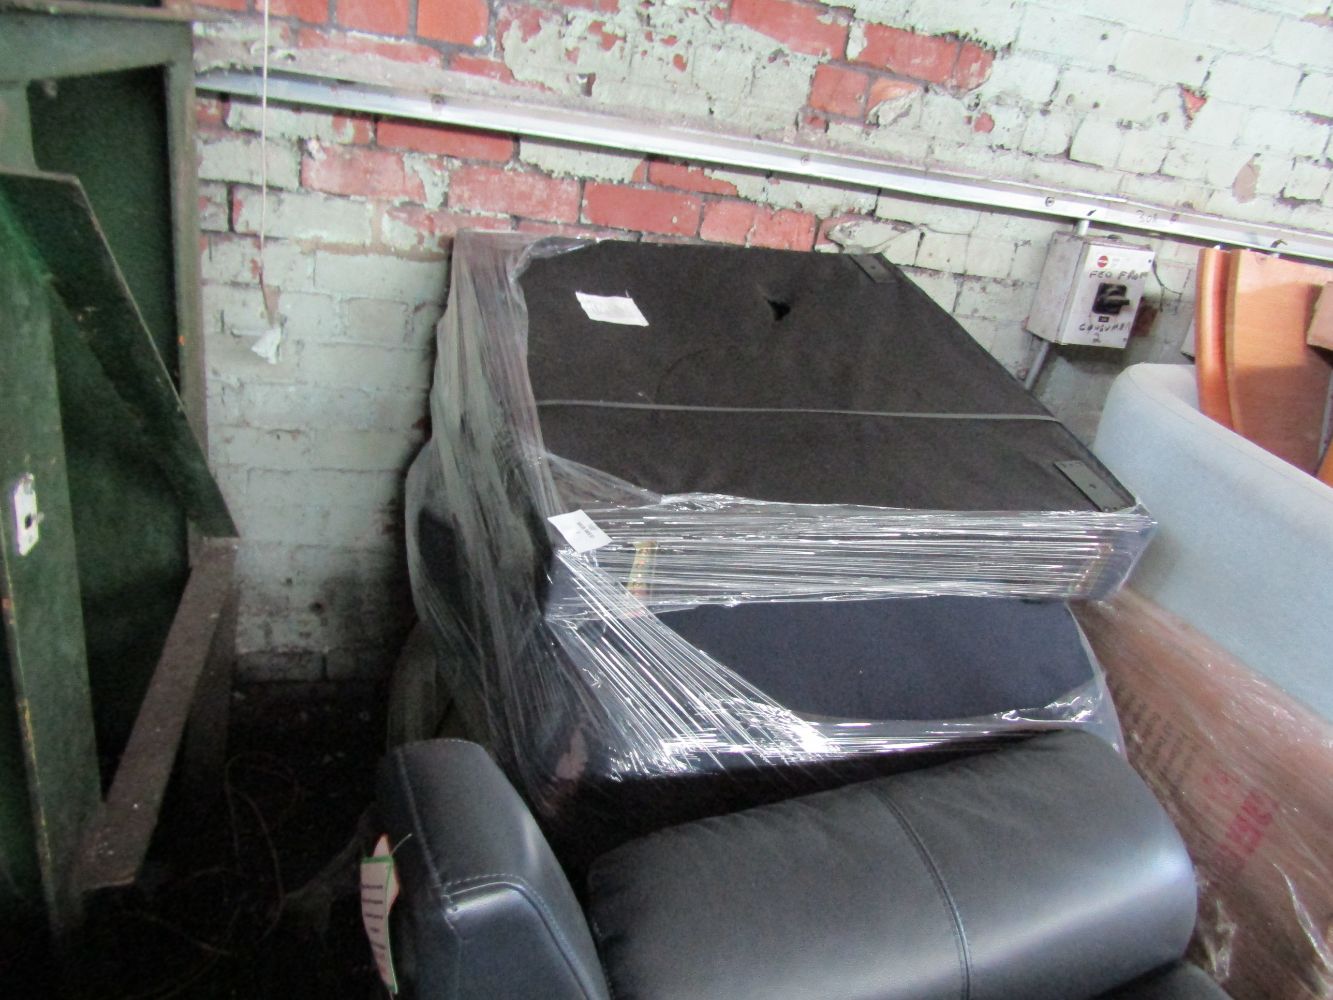 Upcyclers BER furniture pallet auction from brands such as Dusk.com,. SCS, DFS and more - Some with £5 starting bids